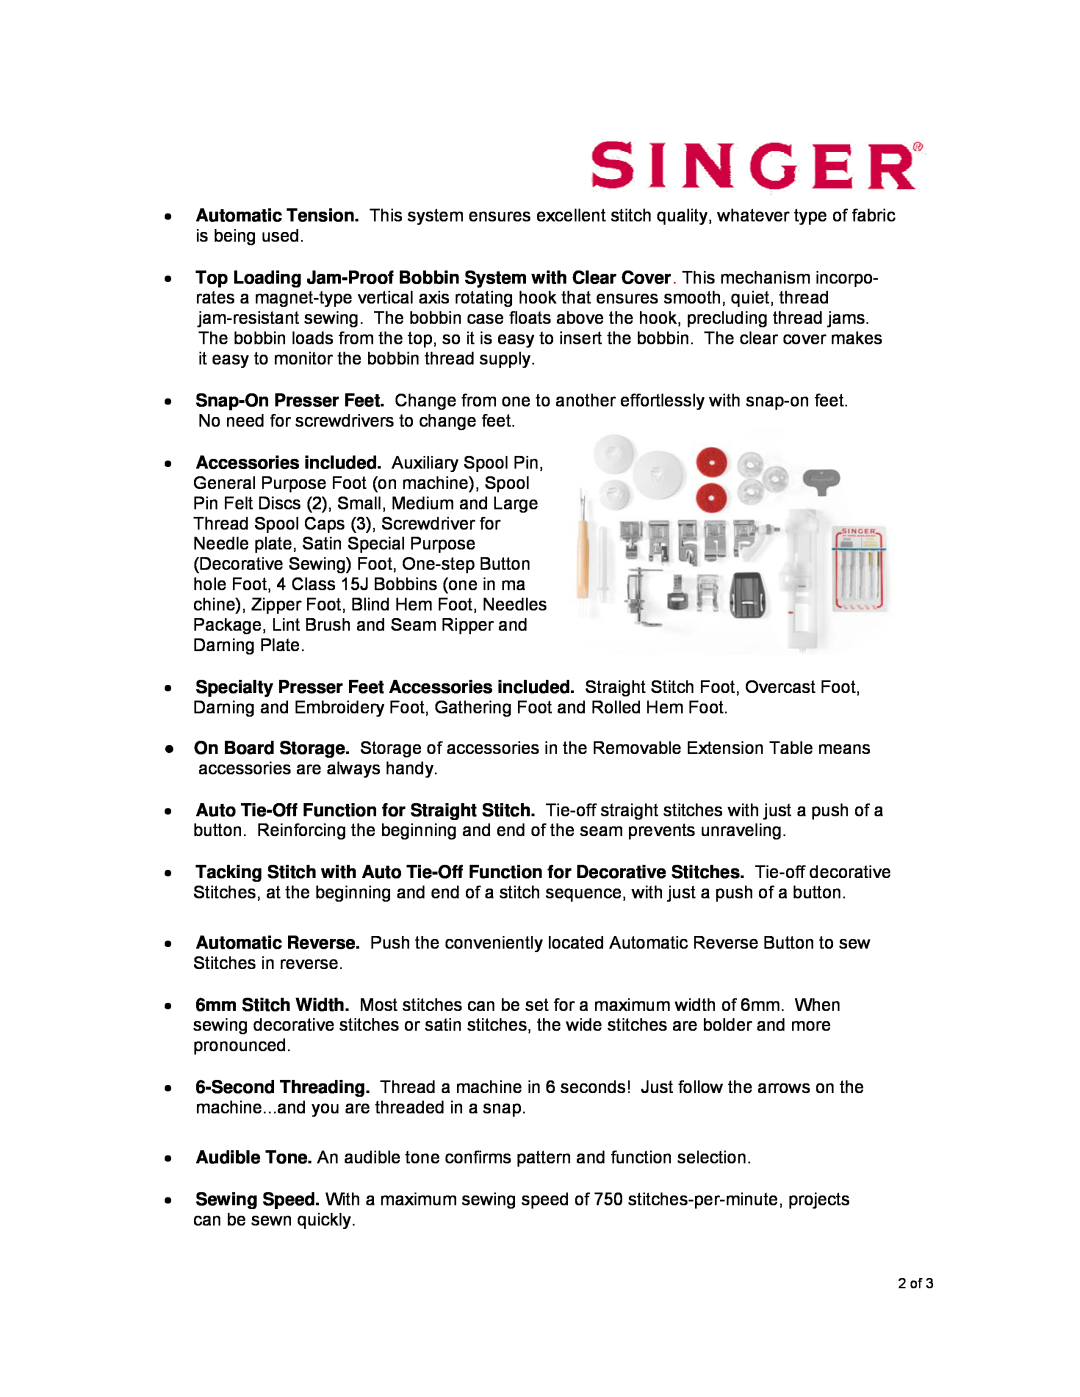 Singer 7258 manual No need for screwdrivers to change feet 